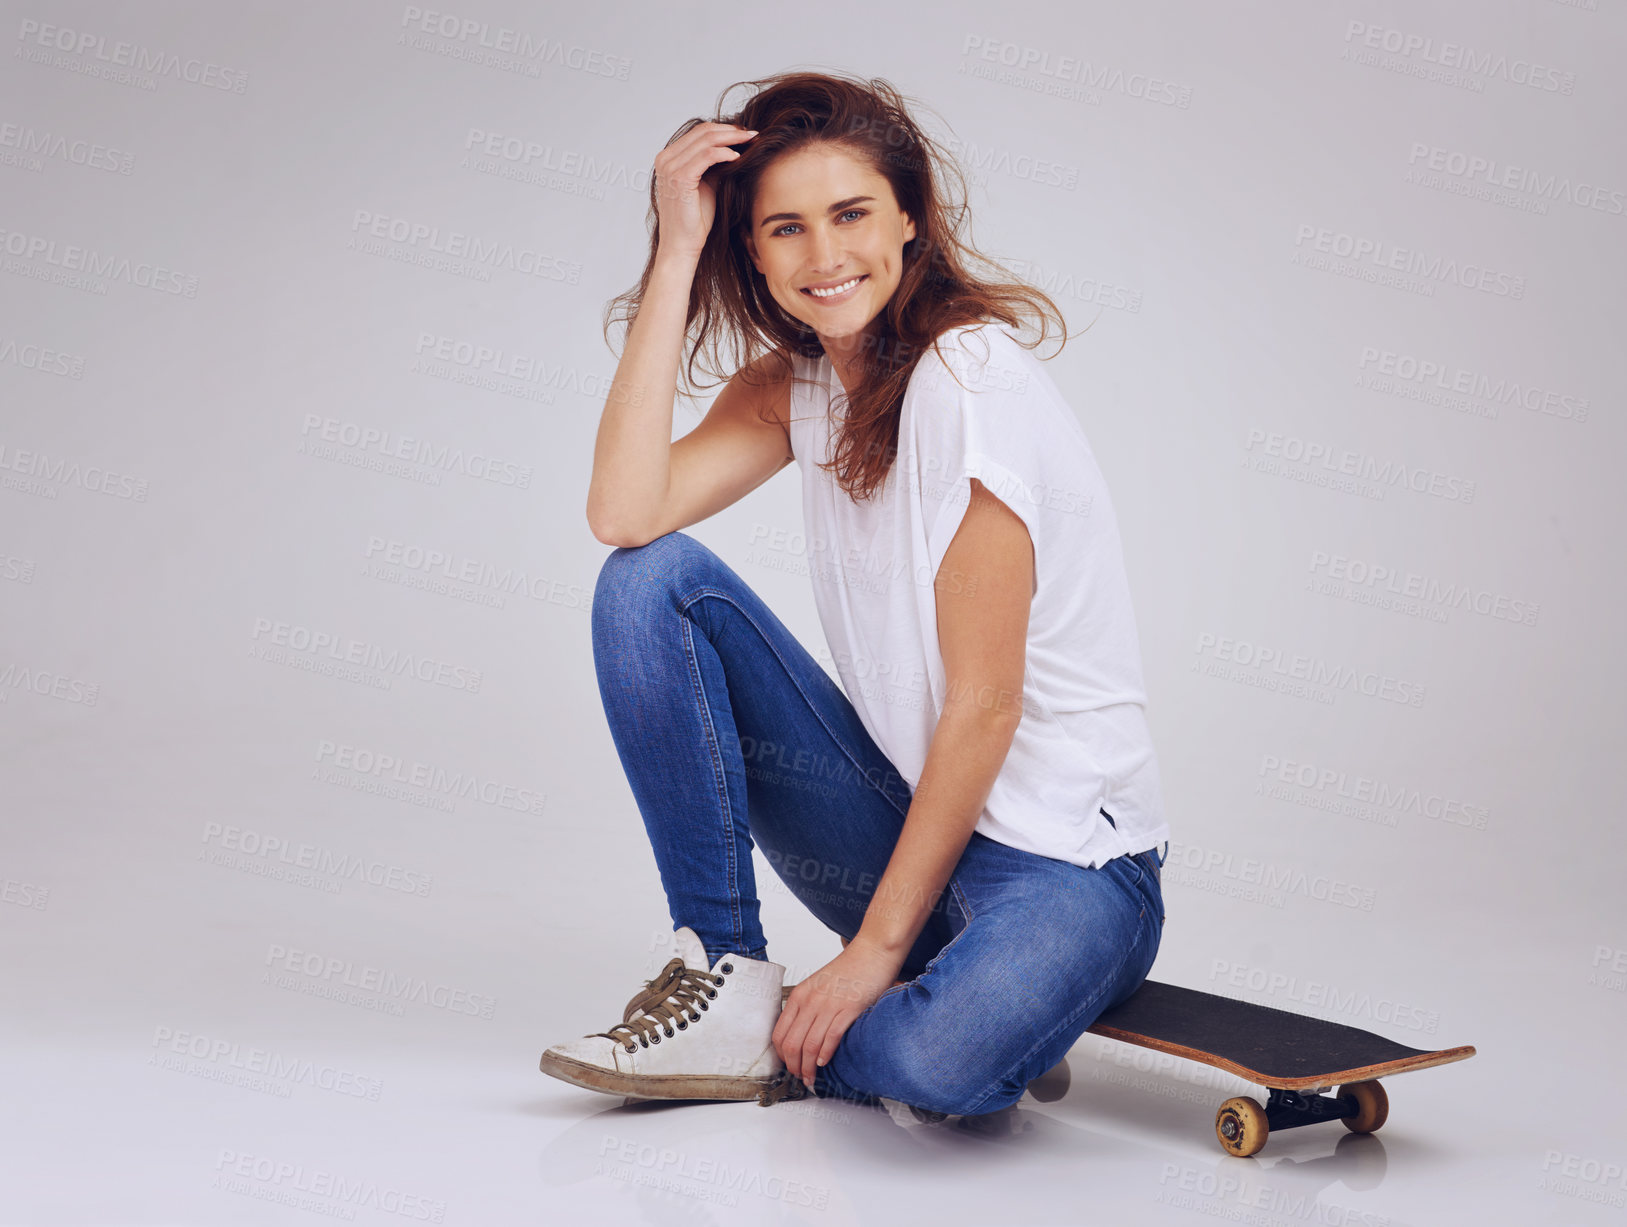 Buy stock photo Studio portrait of an attractive young woman sitting on the floor with a skateboard